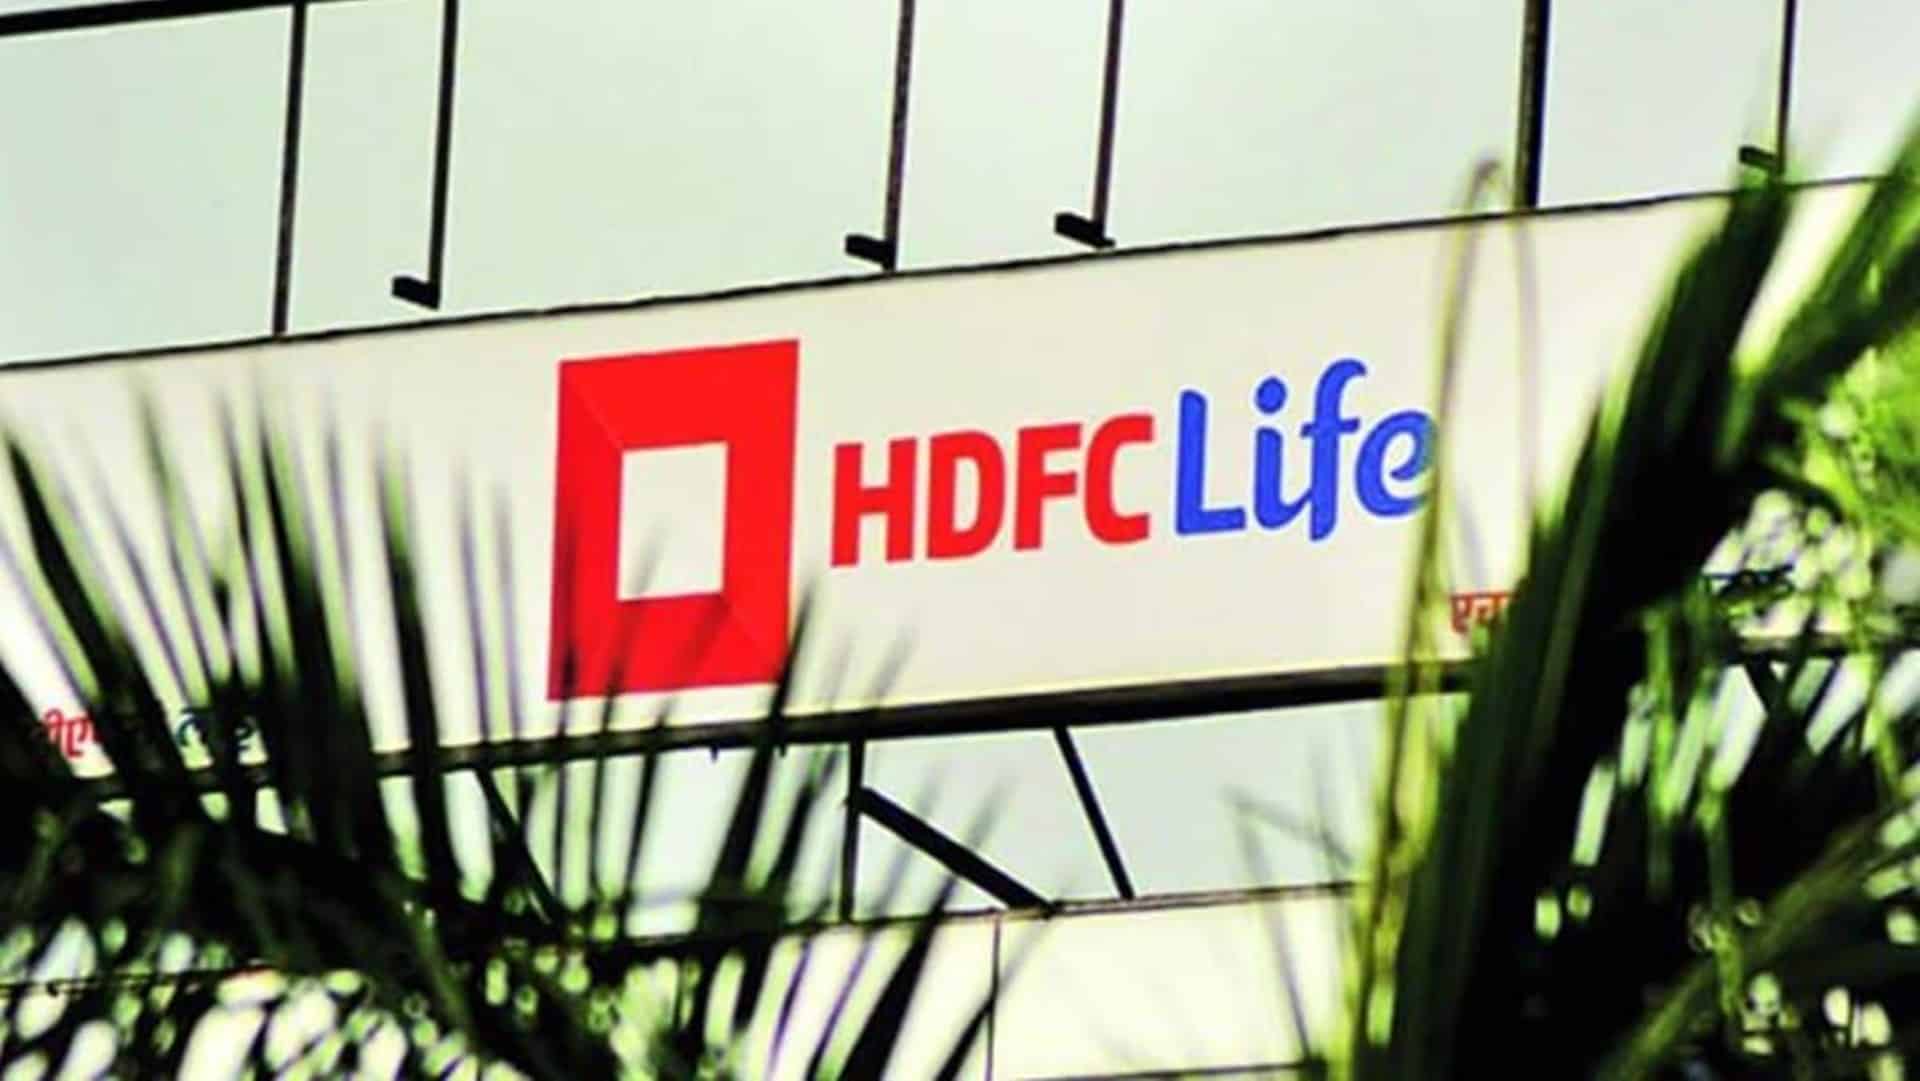 HDFC Life to buy Exide Life in country's biggest insurance deal